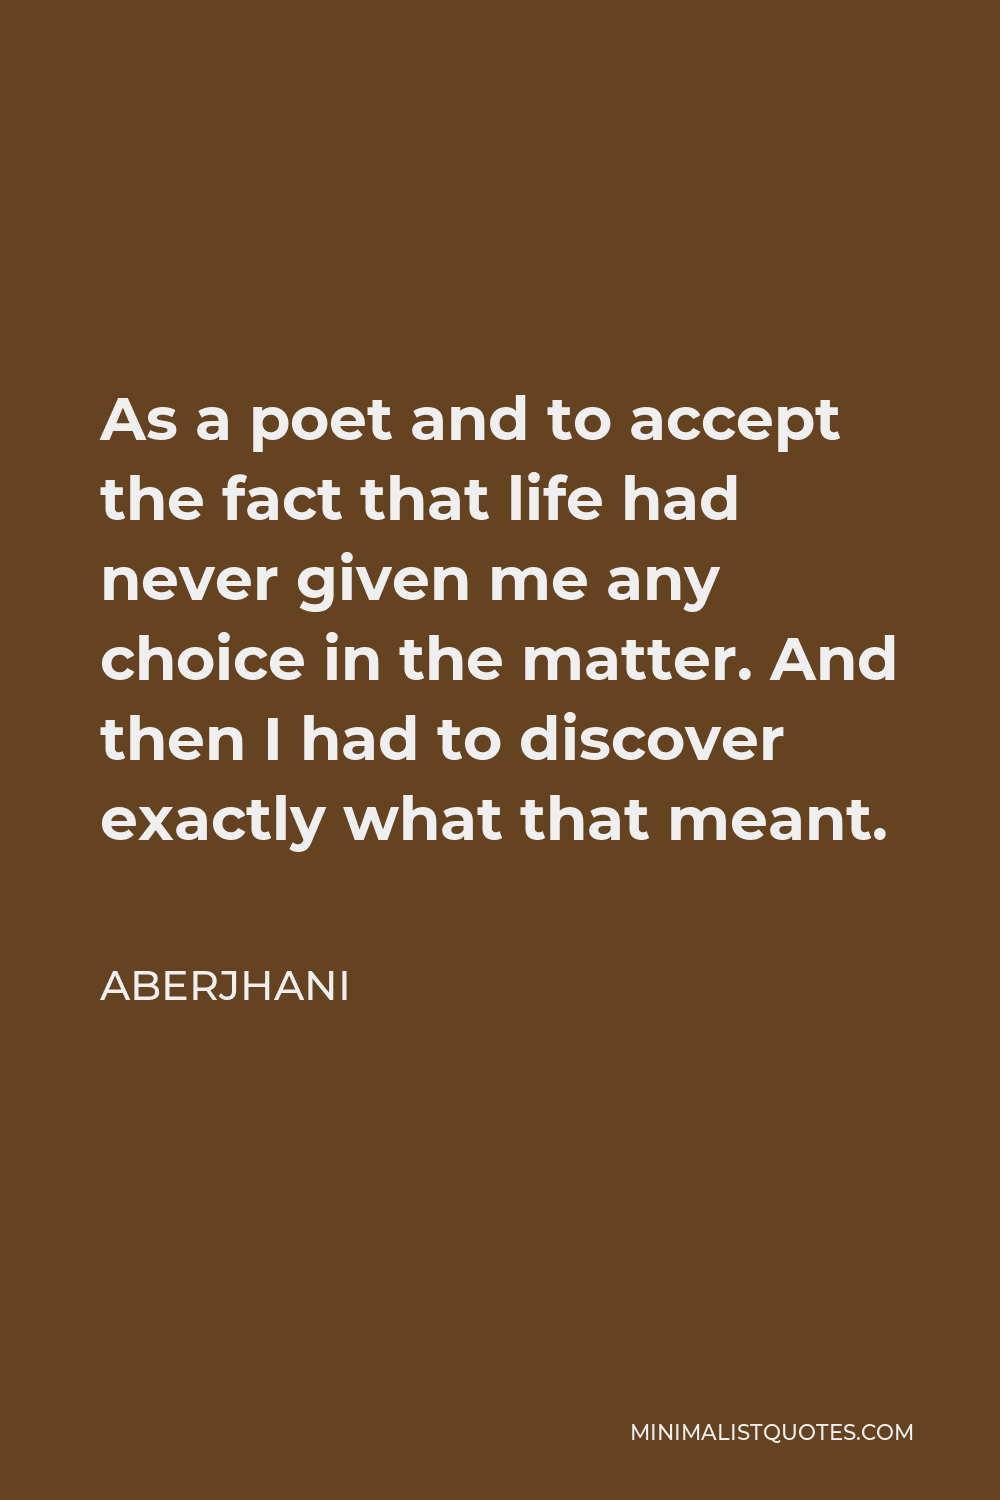 Aberjhani Quote - As a poet and to accept the fact that life had never given me any choice in the matter. And then I had to discover exactly what that meant.